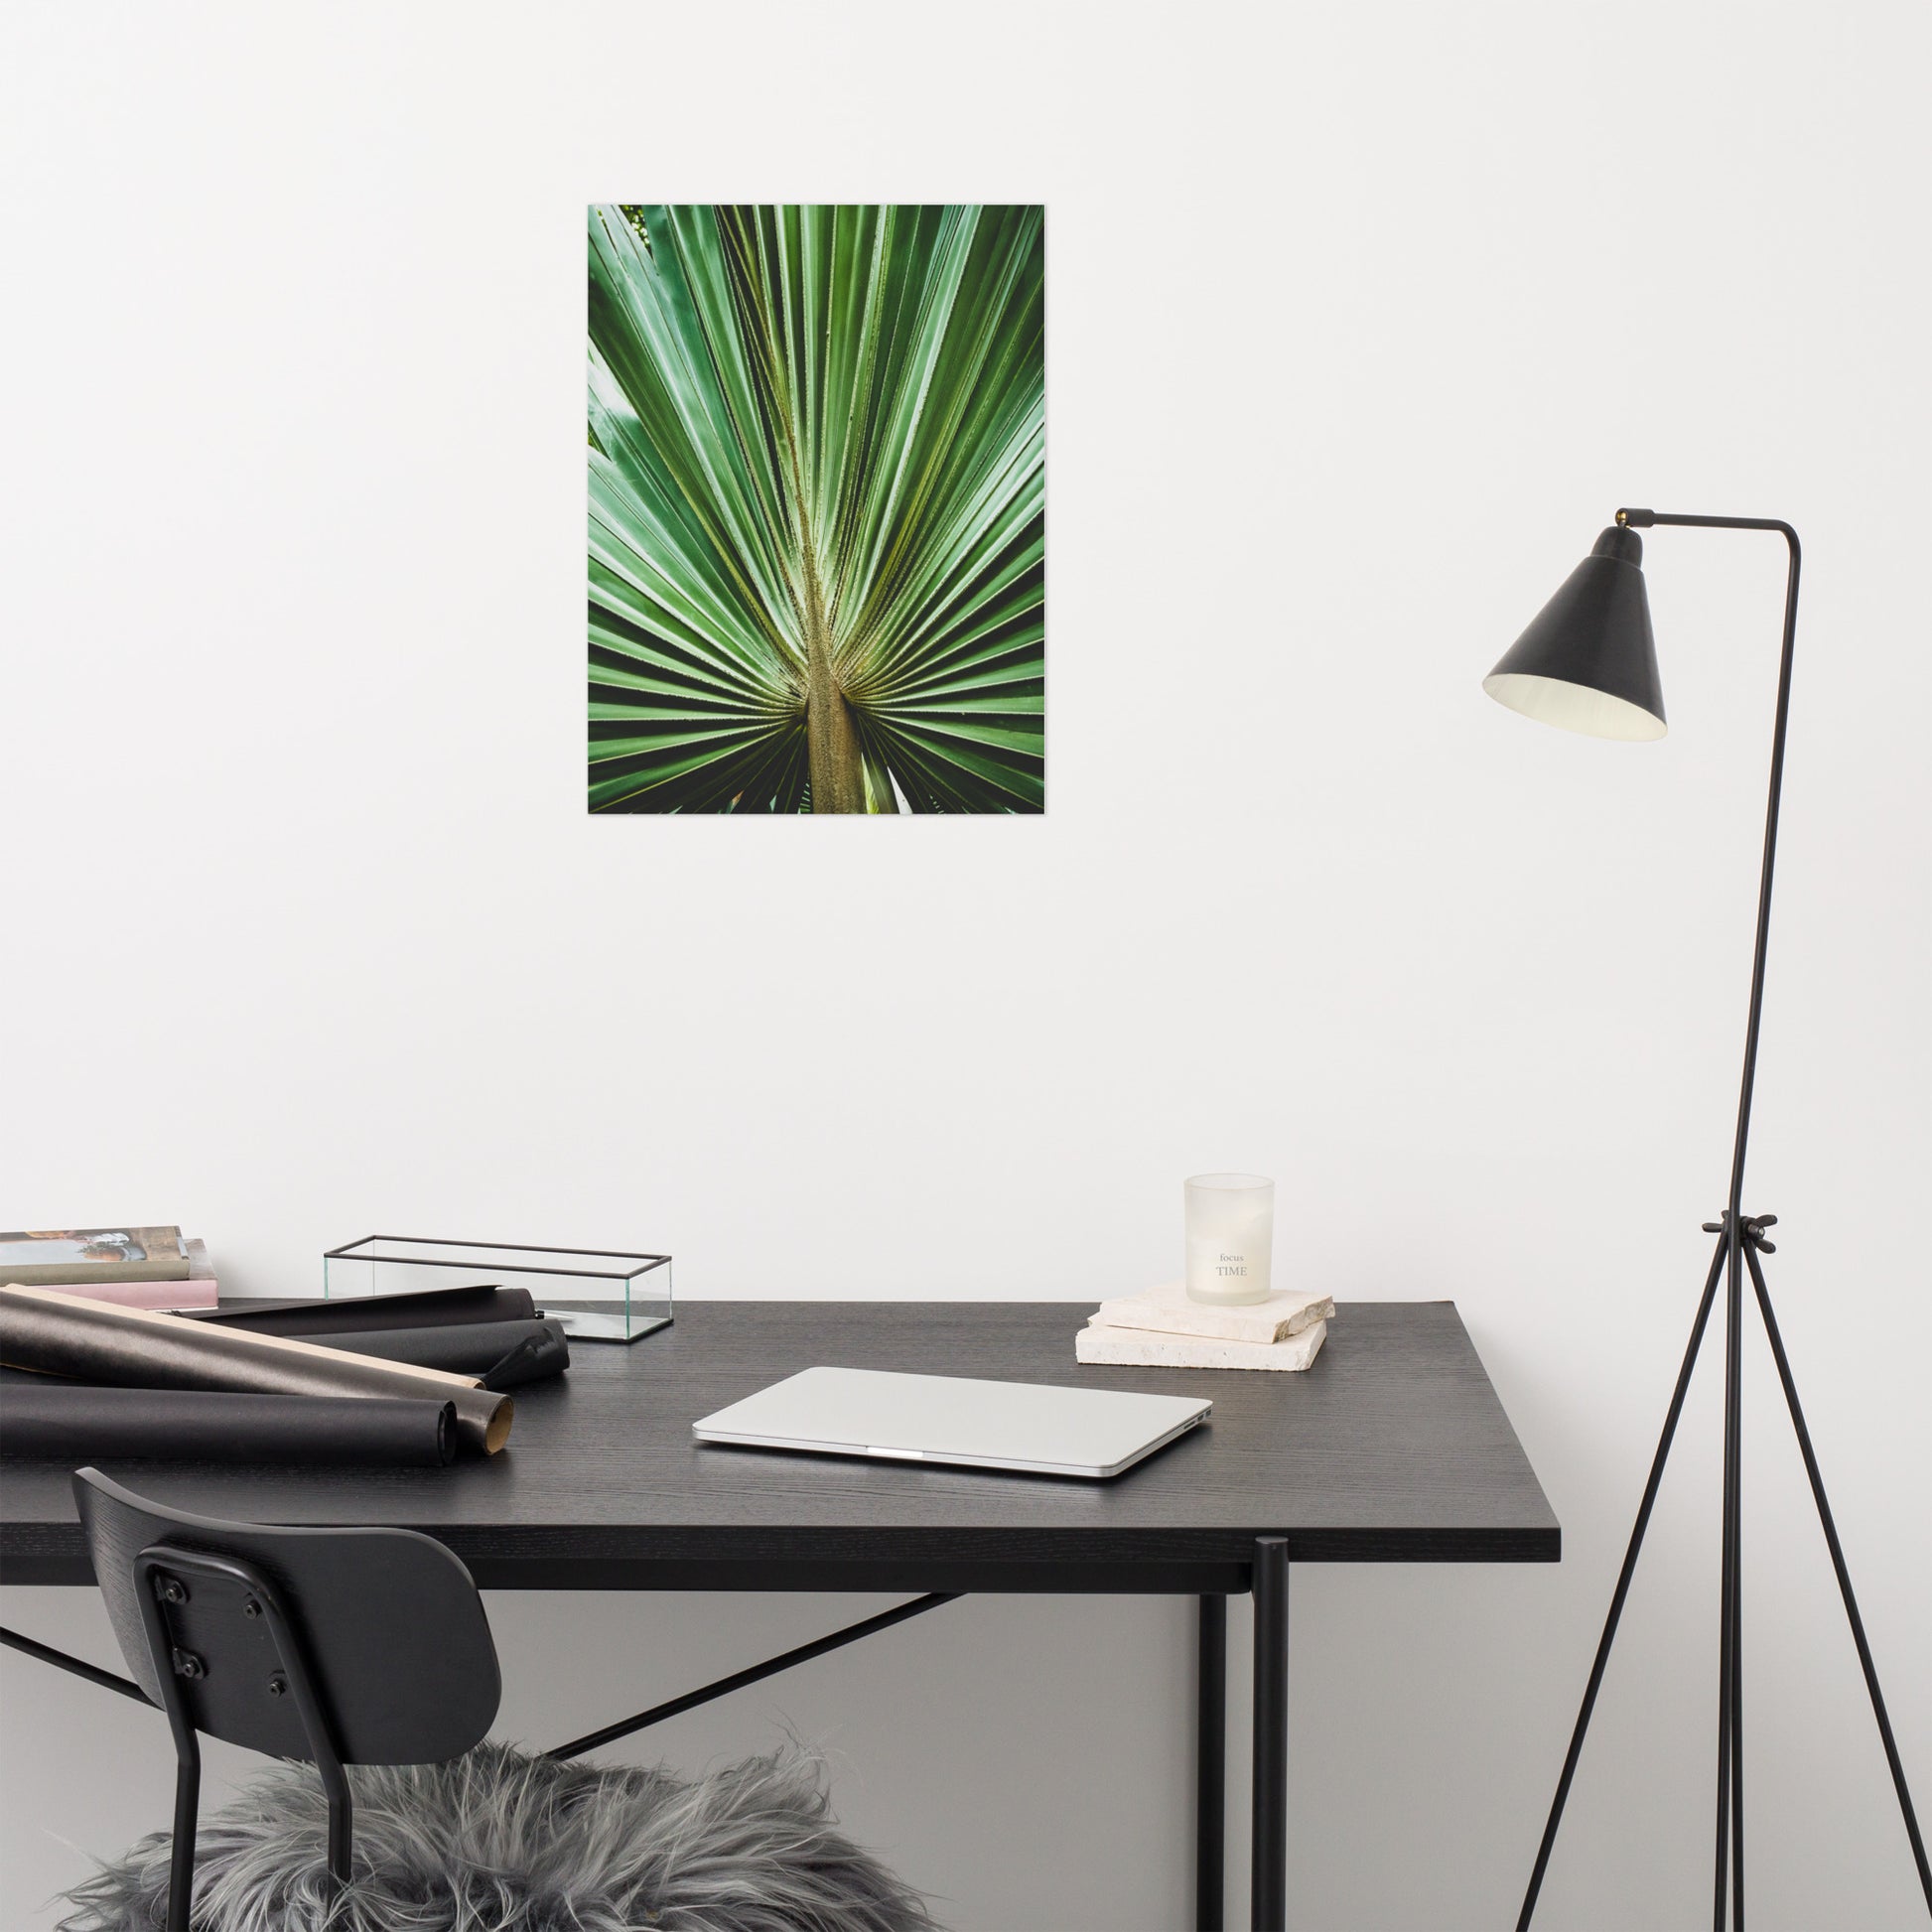 Pediatric Dental Office Wall Decor: Aged and Colorized Wide Palm Leaves 2 - Botanical / Plants / Nature Photograph Loose / Unframed Wall Art Print - Artwork